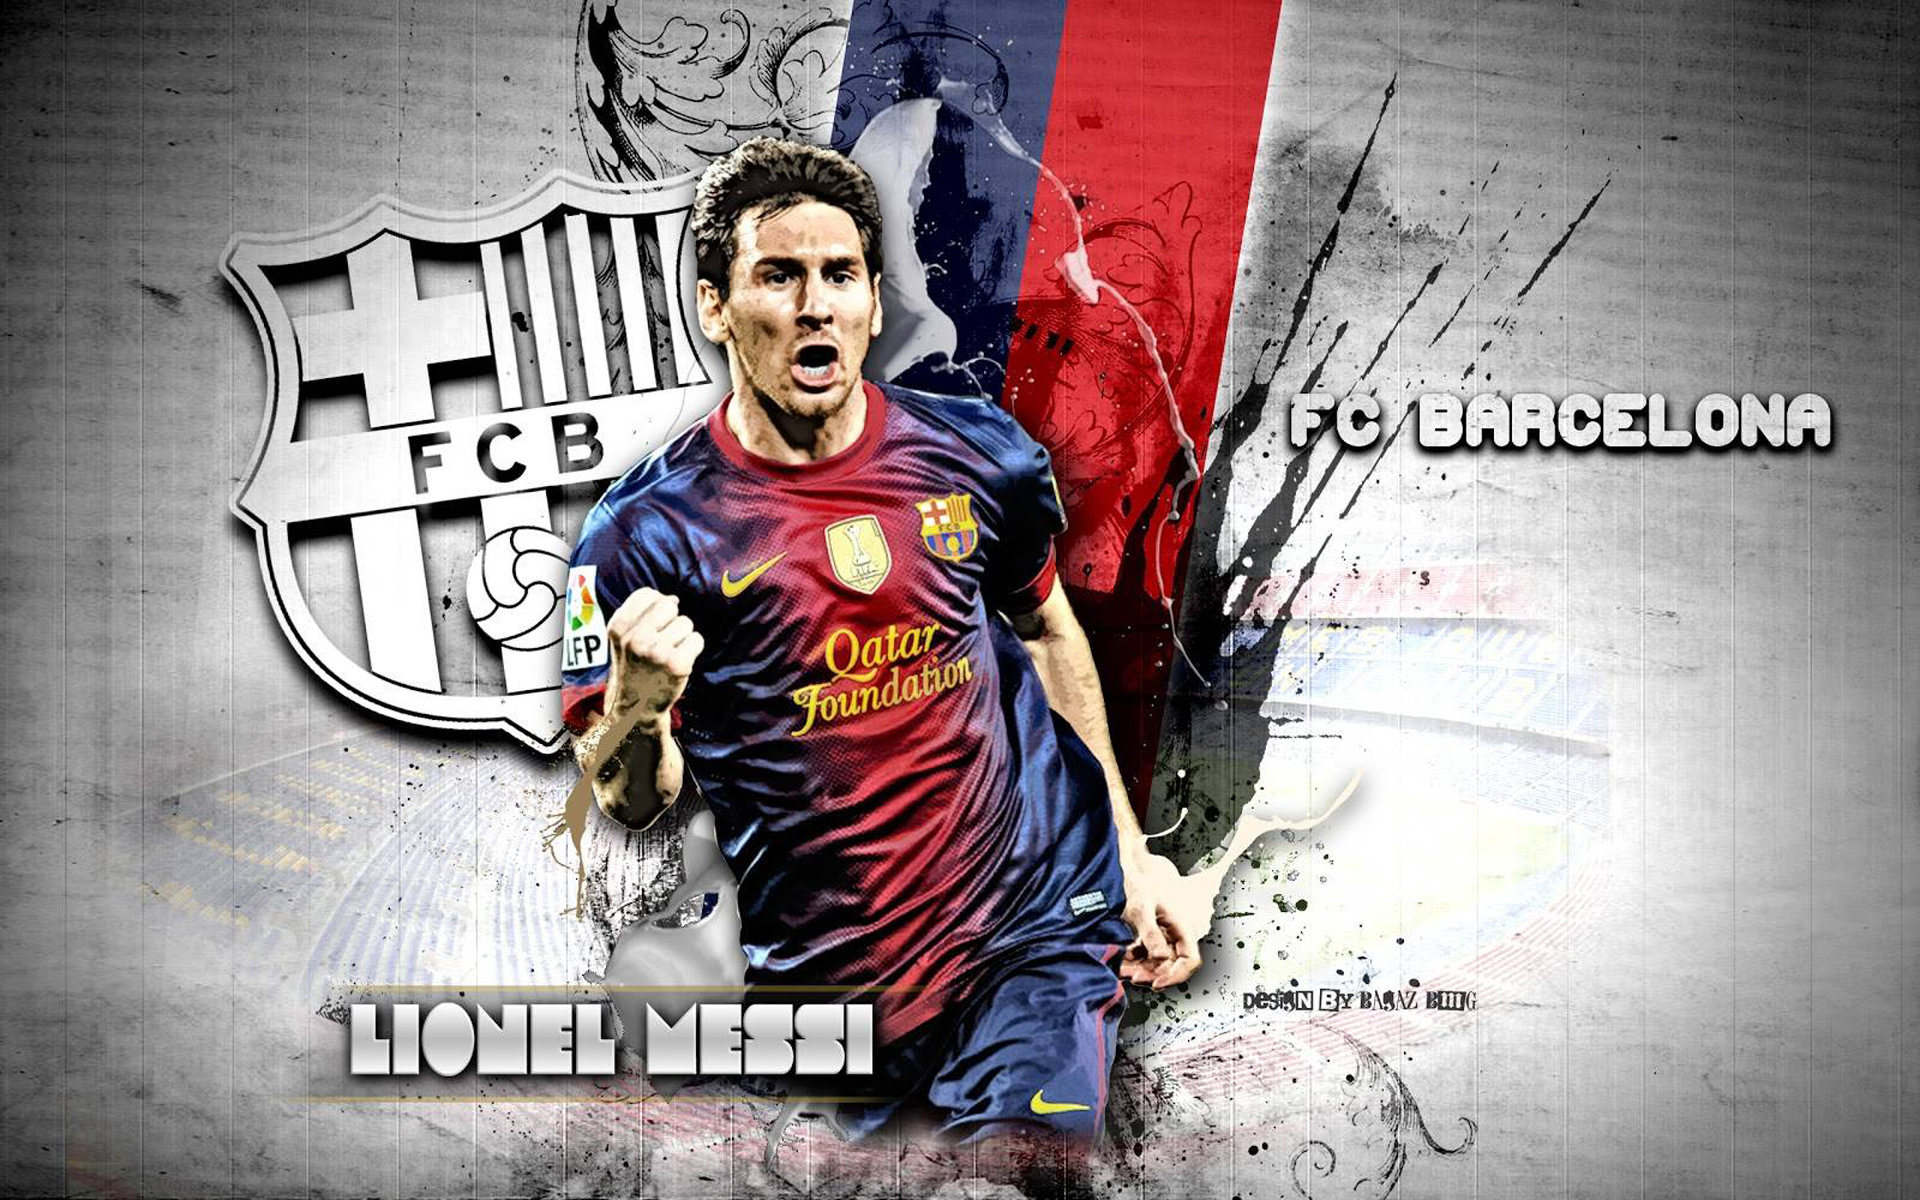 messi wallpaper hd,fictional character,football player,graphic design,poster,font